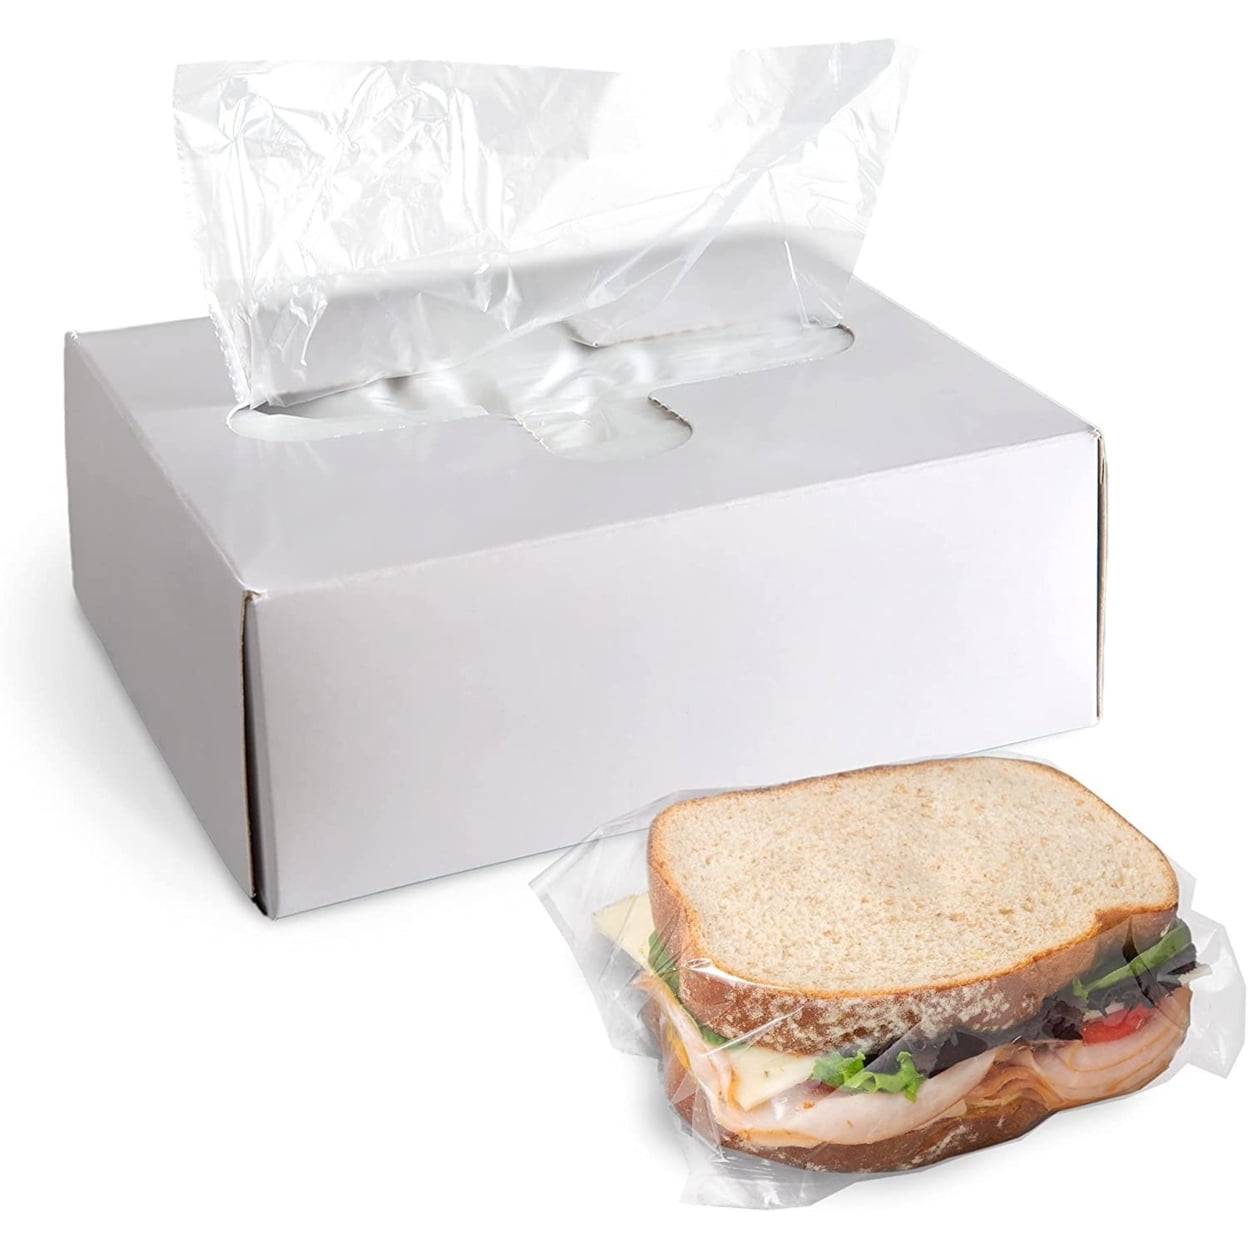 PUREVACY Fold Top Plastic Sandwich Bags 6.5 x 7 Inches. Pack of 2000 Clear  Plastic Sandwich Baggies with Flip-Top Closure, 0.5 Mil Thick Polyethylene